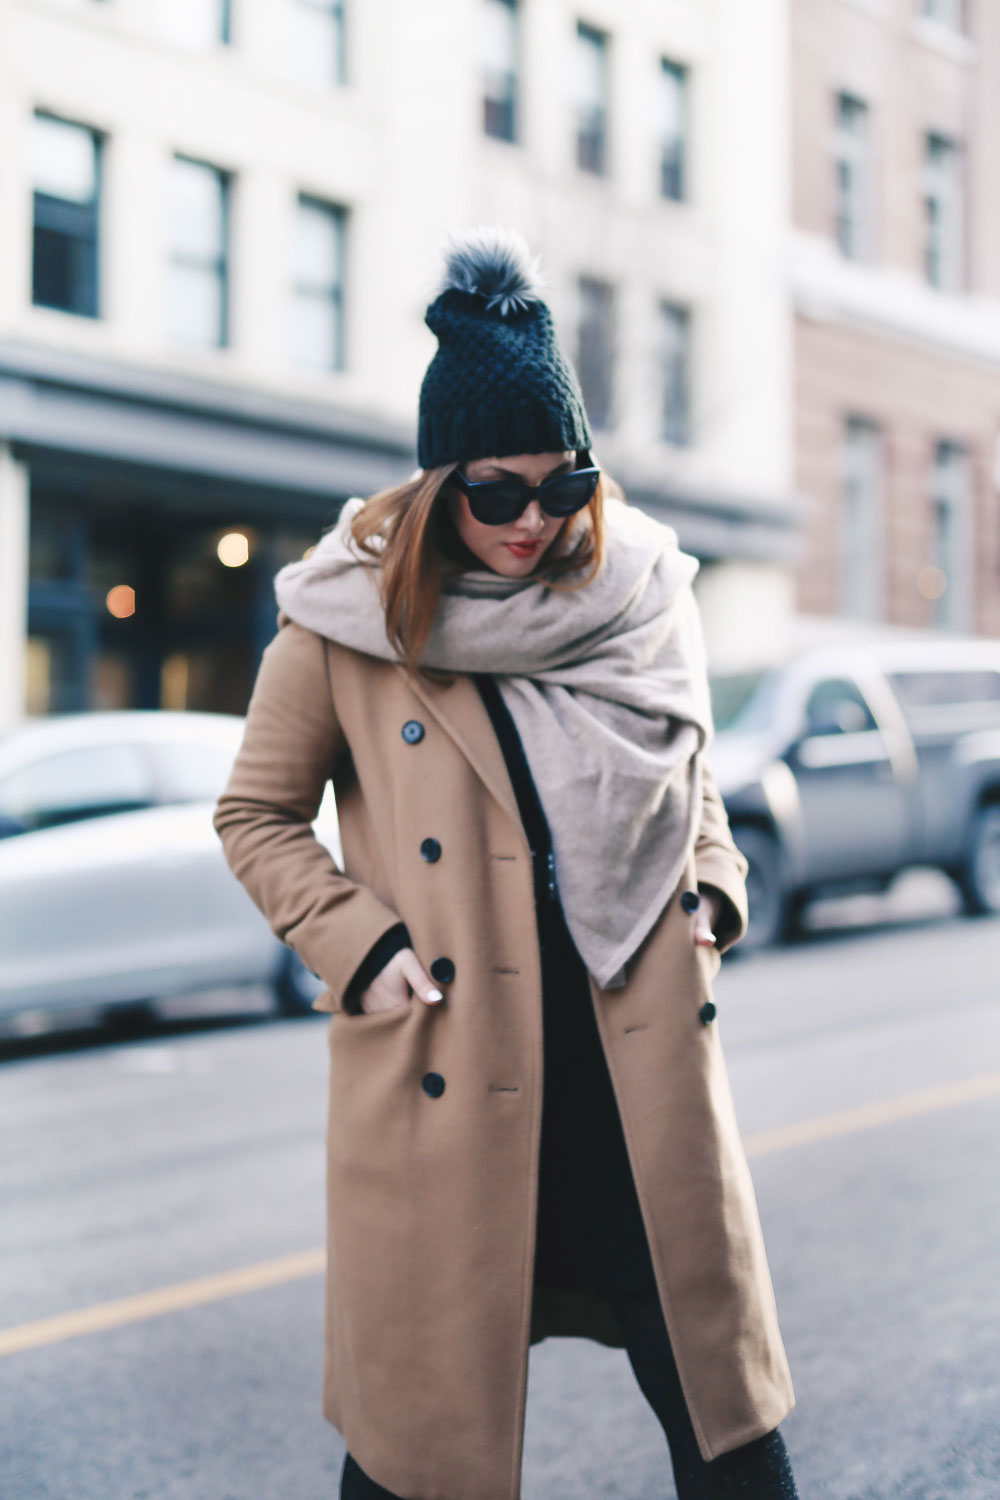 Tips on wearing a dress in the winter styled by To Vogue or Bust in an Aritzia camel wool coat, White and Warren cashmere dress, White and Warren cashmere travel wrap, Frye ankle boots, Express beanie hat and Celine Caty sunglasses